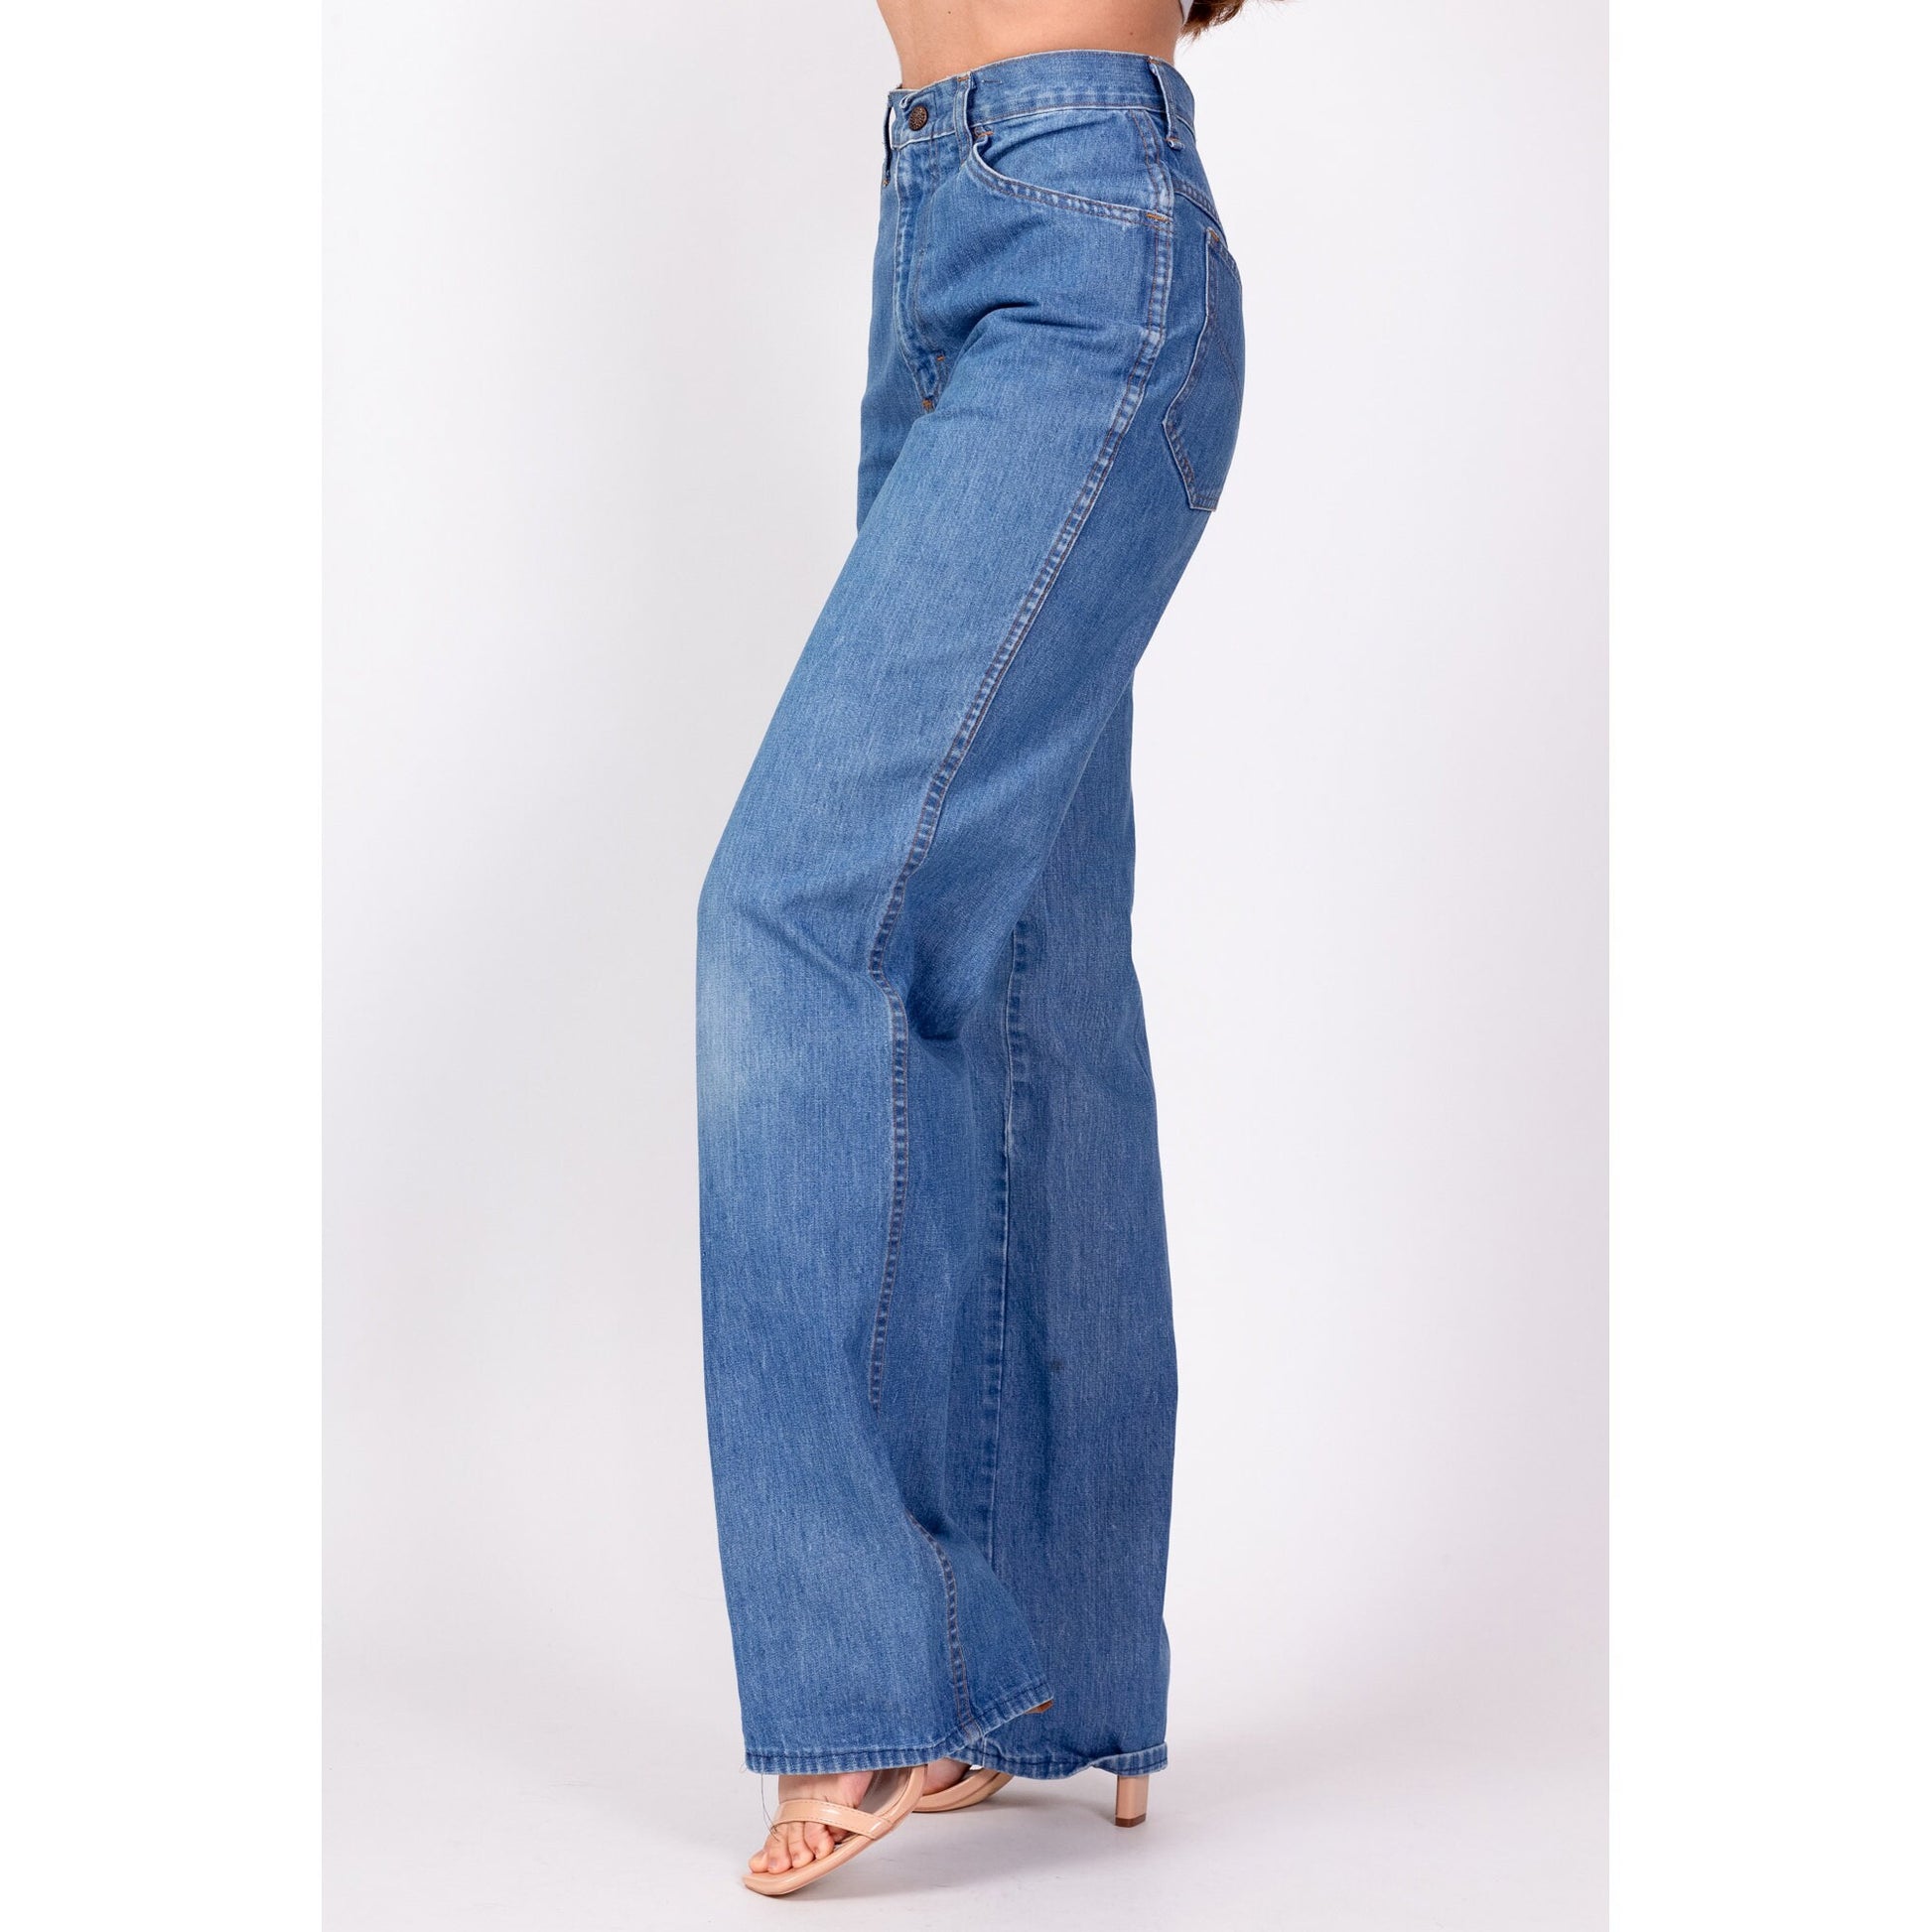 70s High Waisted Bootcut Jeans - Extra Small, 24" 